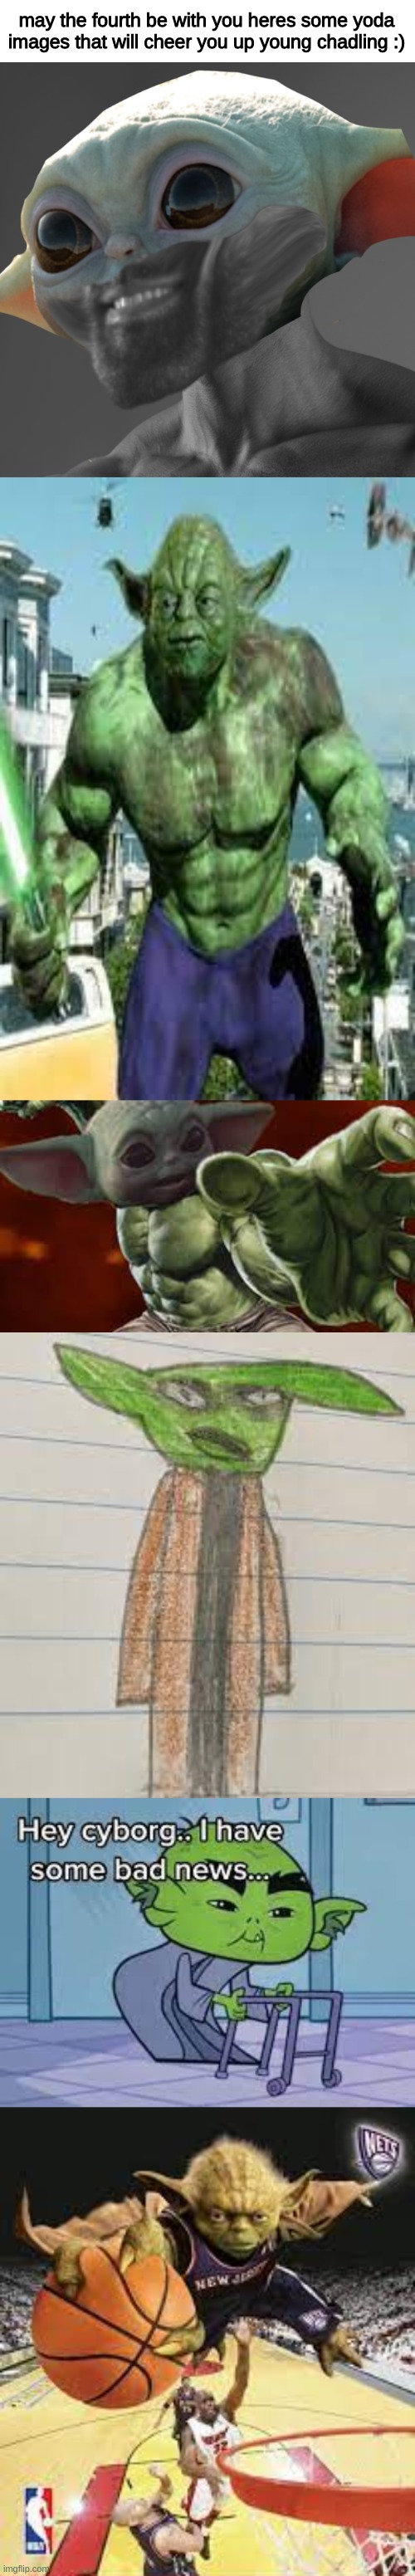 Chadlings must have good day | may the fourth be with you heres some yoda images that will cheer you up young chadling :) | image tagged in memes,funny,may the 4th,may the fourth be with you,star wars yoda,star wars | made w/ Imgflip meme maker